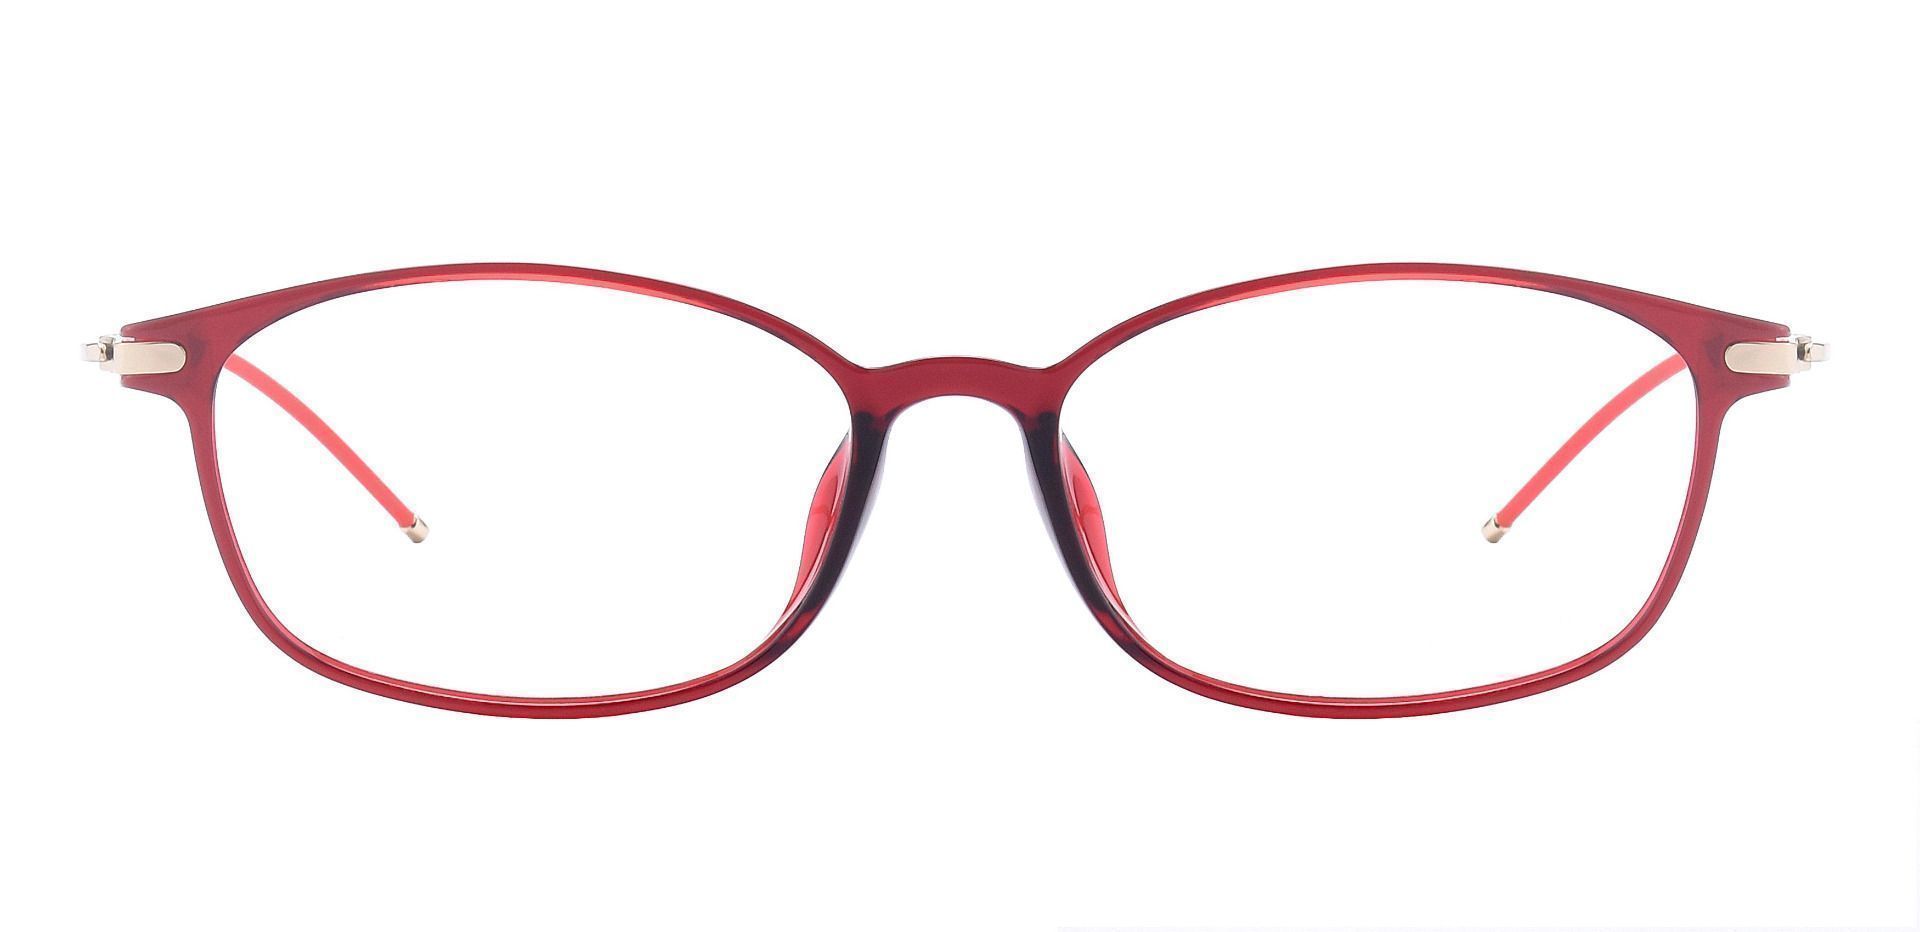 Decker Oval Lined Bifocal Glasses - Red